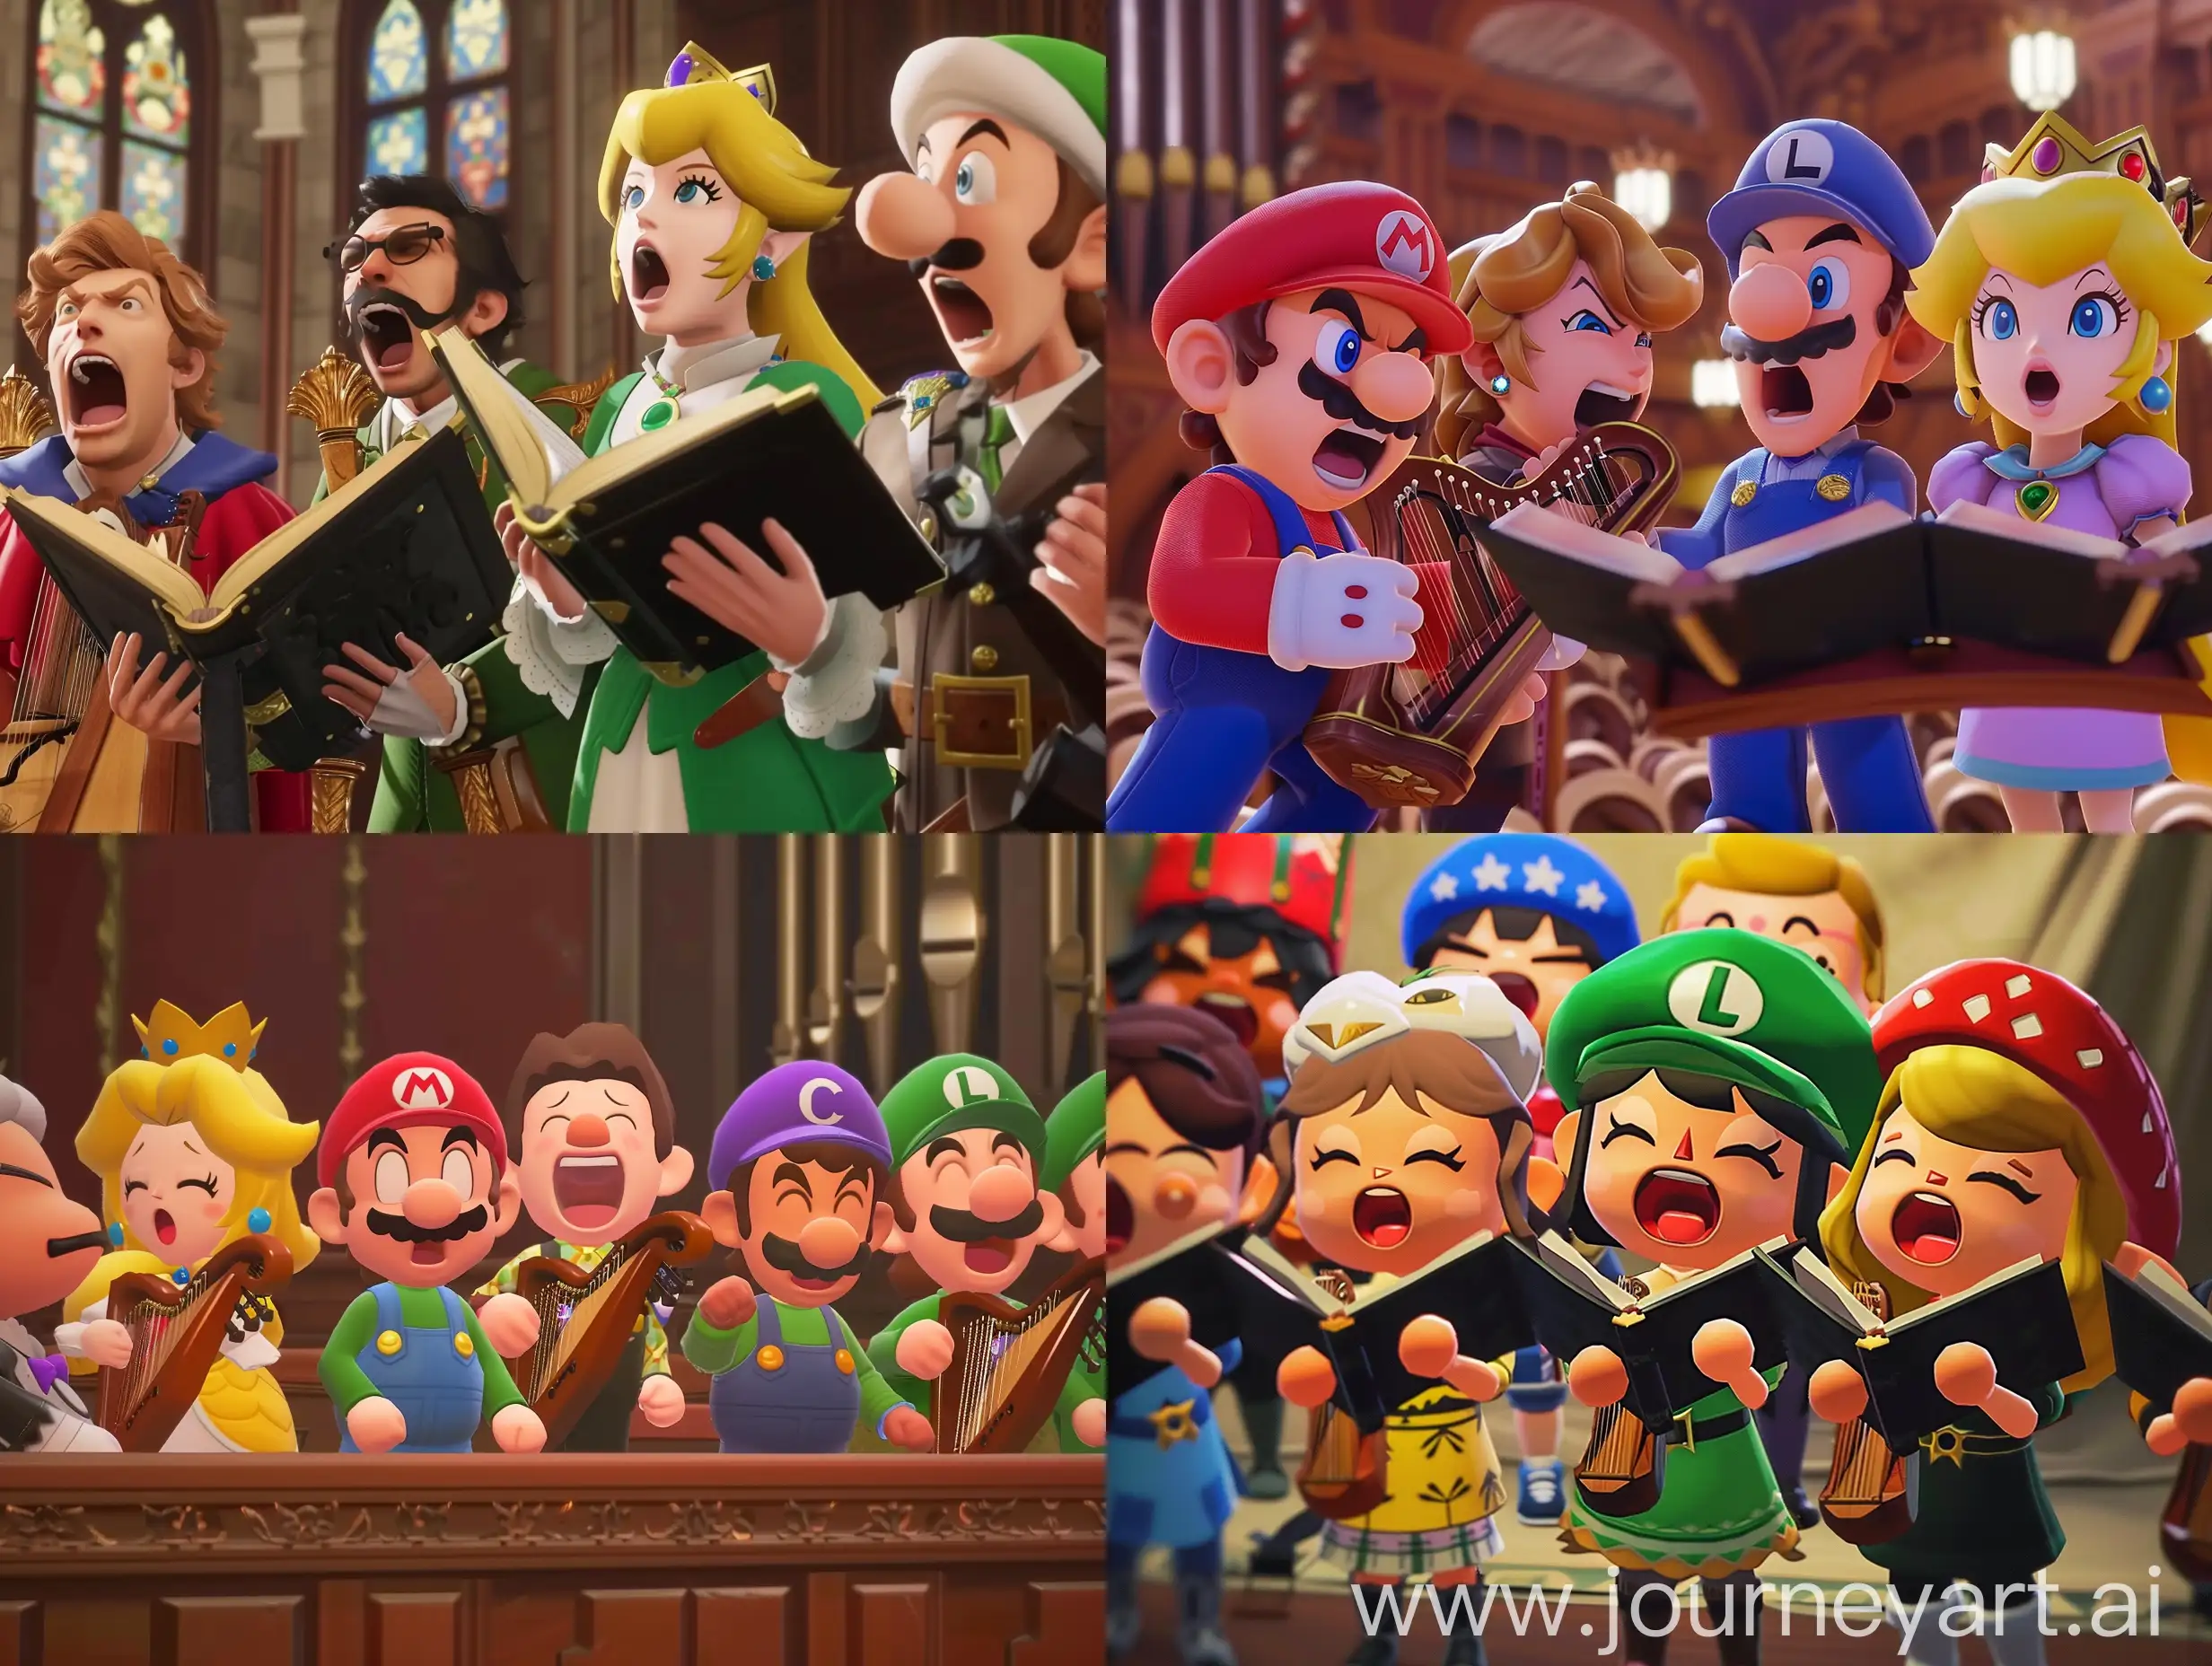 Intense-Sacred-Harp-Singing-Convention-with-Video-Game-Characters